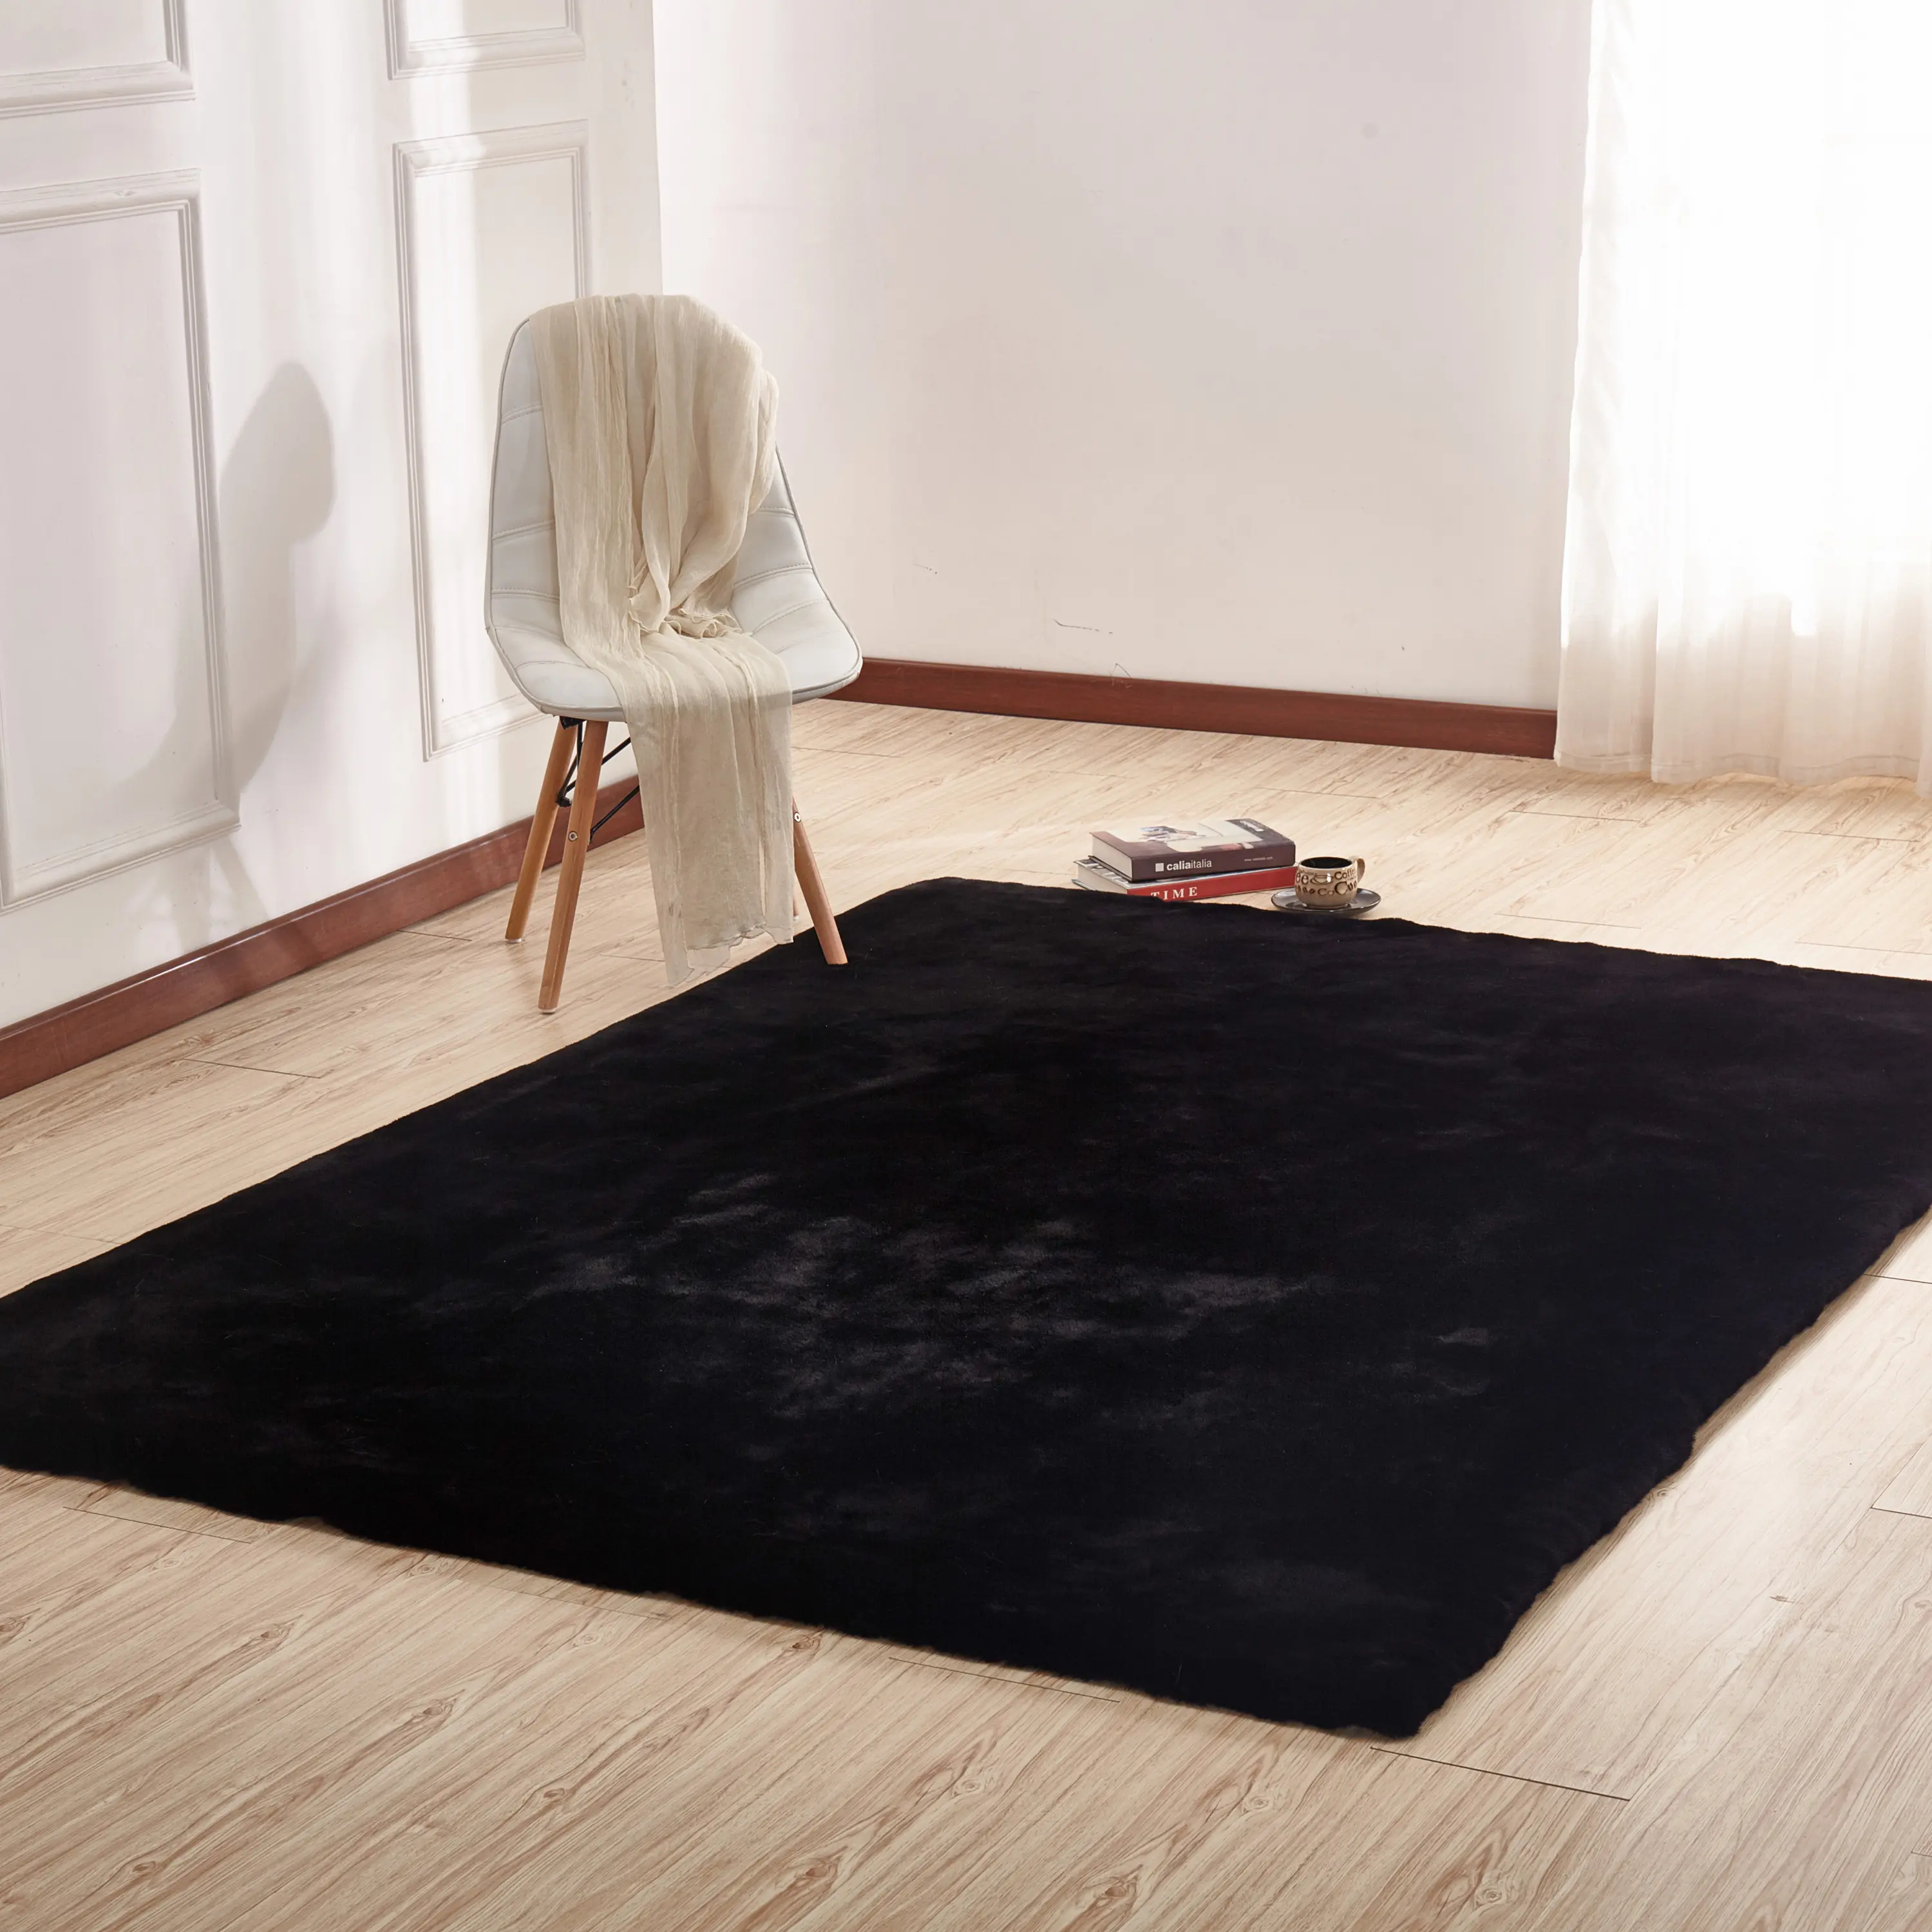 https://static.rcwilley.com/products/111437090/Chinchilla-5-x-7-Faux-Fur-Black-Area-Rug-rcwilley-image1.webp